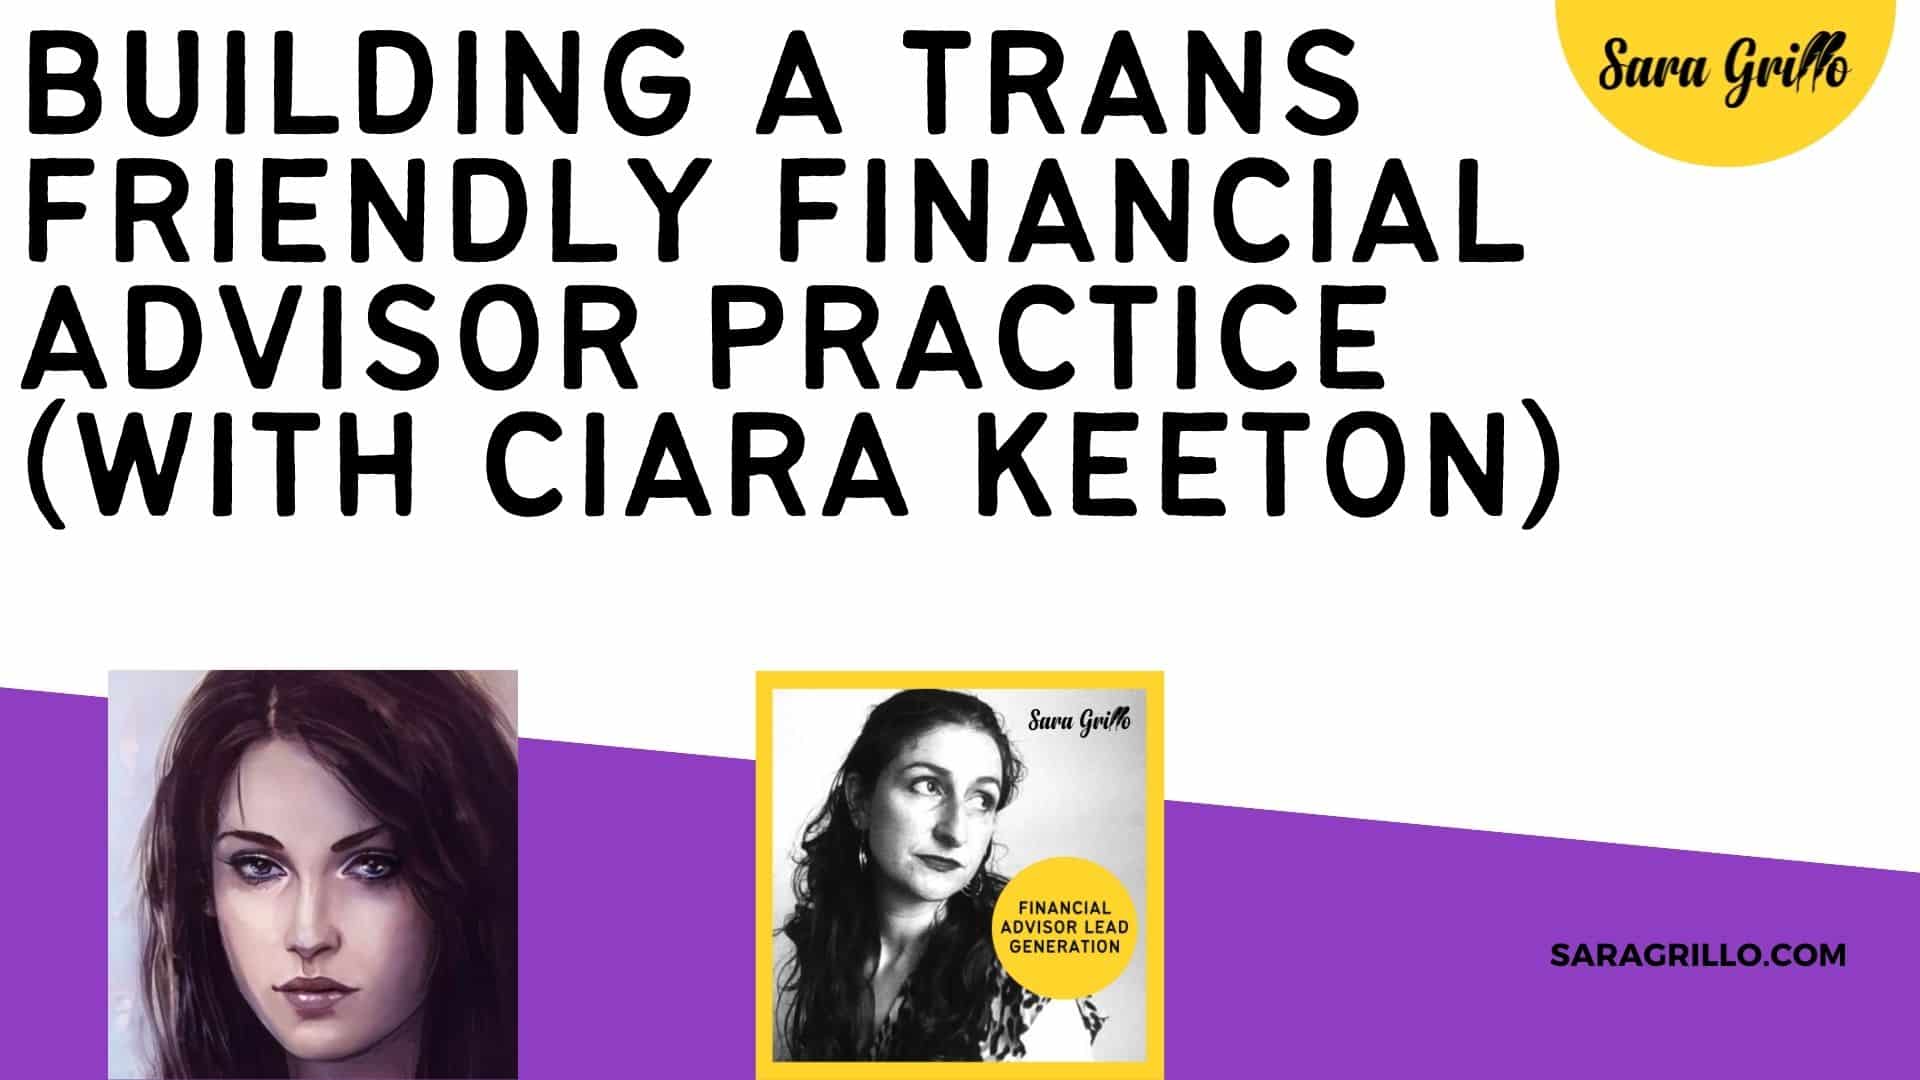 In this podcast and blog, we talk about tips for building a trans-friendly financial advisor practice and there are many useful insights from Ciara Keeton, a trans woman.